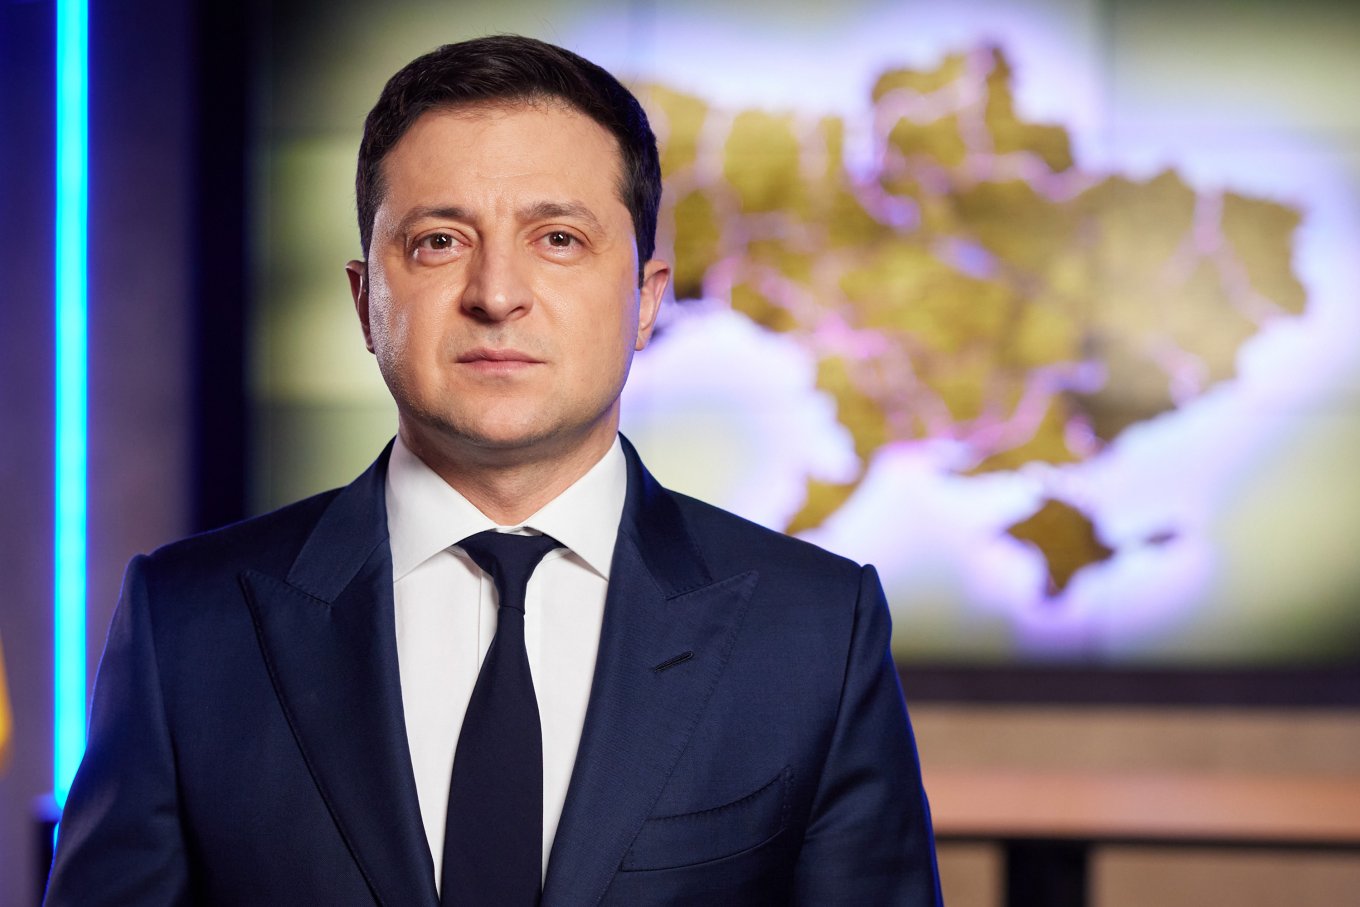 Defense Express / President of Ukraine Volodymyr Zelenskyy held a speech regarding Russia having recognized the so-called DPR/LPR / Government Allows Putin to Use Military Force Outside of Russia